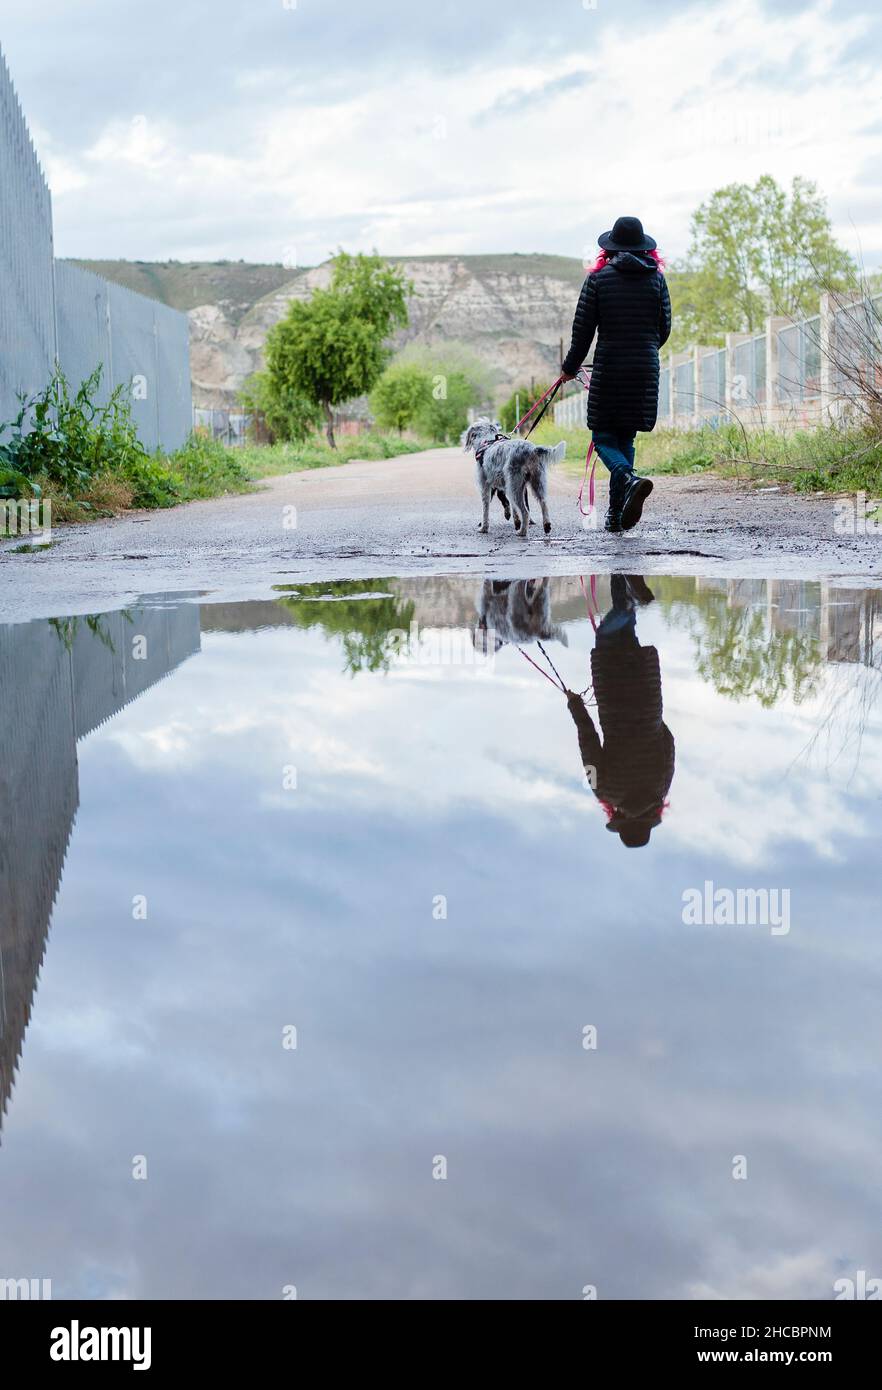 Woman walking with dog reflection on road puddle Stock Photo